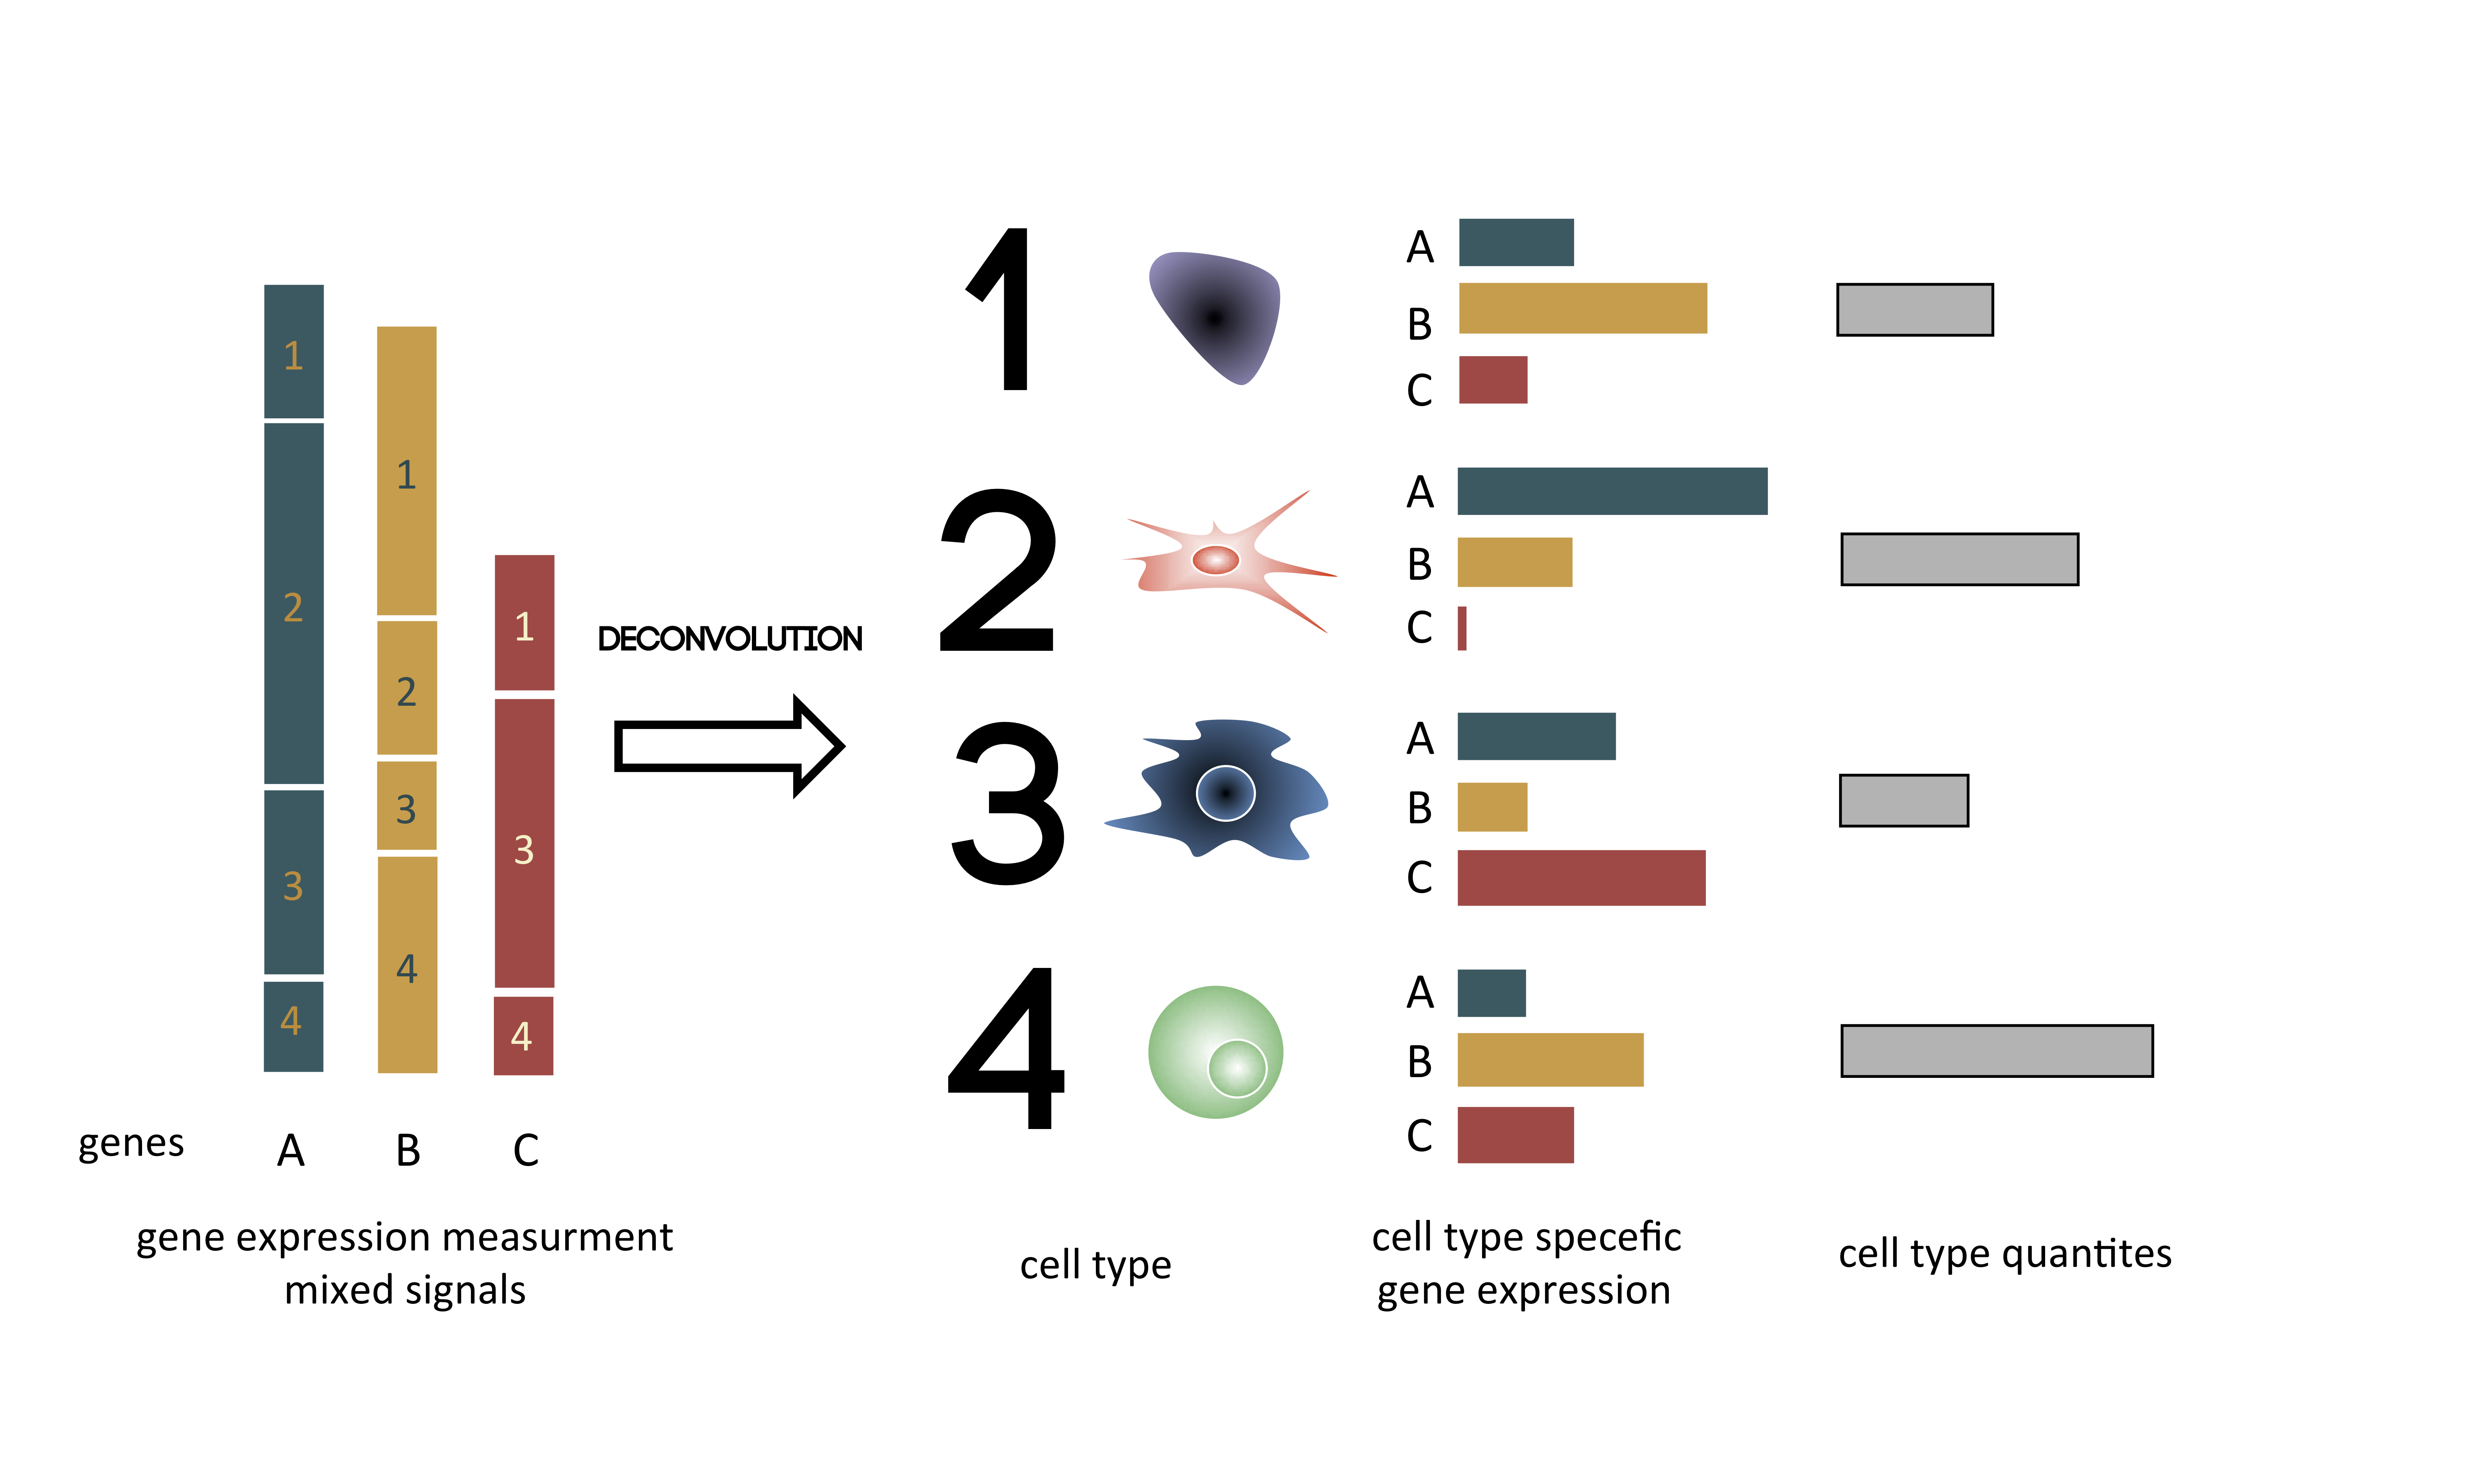 Principle of the deconvolution applied to transcriptome Graphical illustration of the deconvolution of mixed samples. Starting from the left, gene expression of genes A B C is a sum of expression of cell types 1, 2, 3, 4. After deconvolution, cell types are separated, and gene expression of each cell type is estimated taking into account cell type proportions.